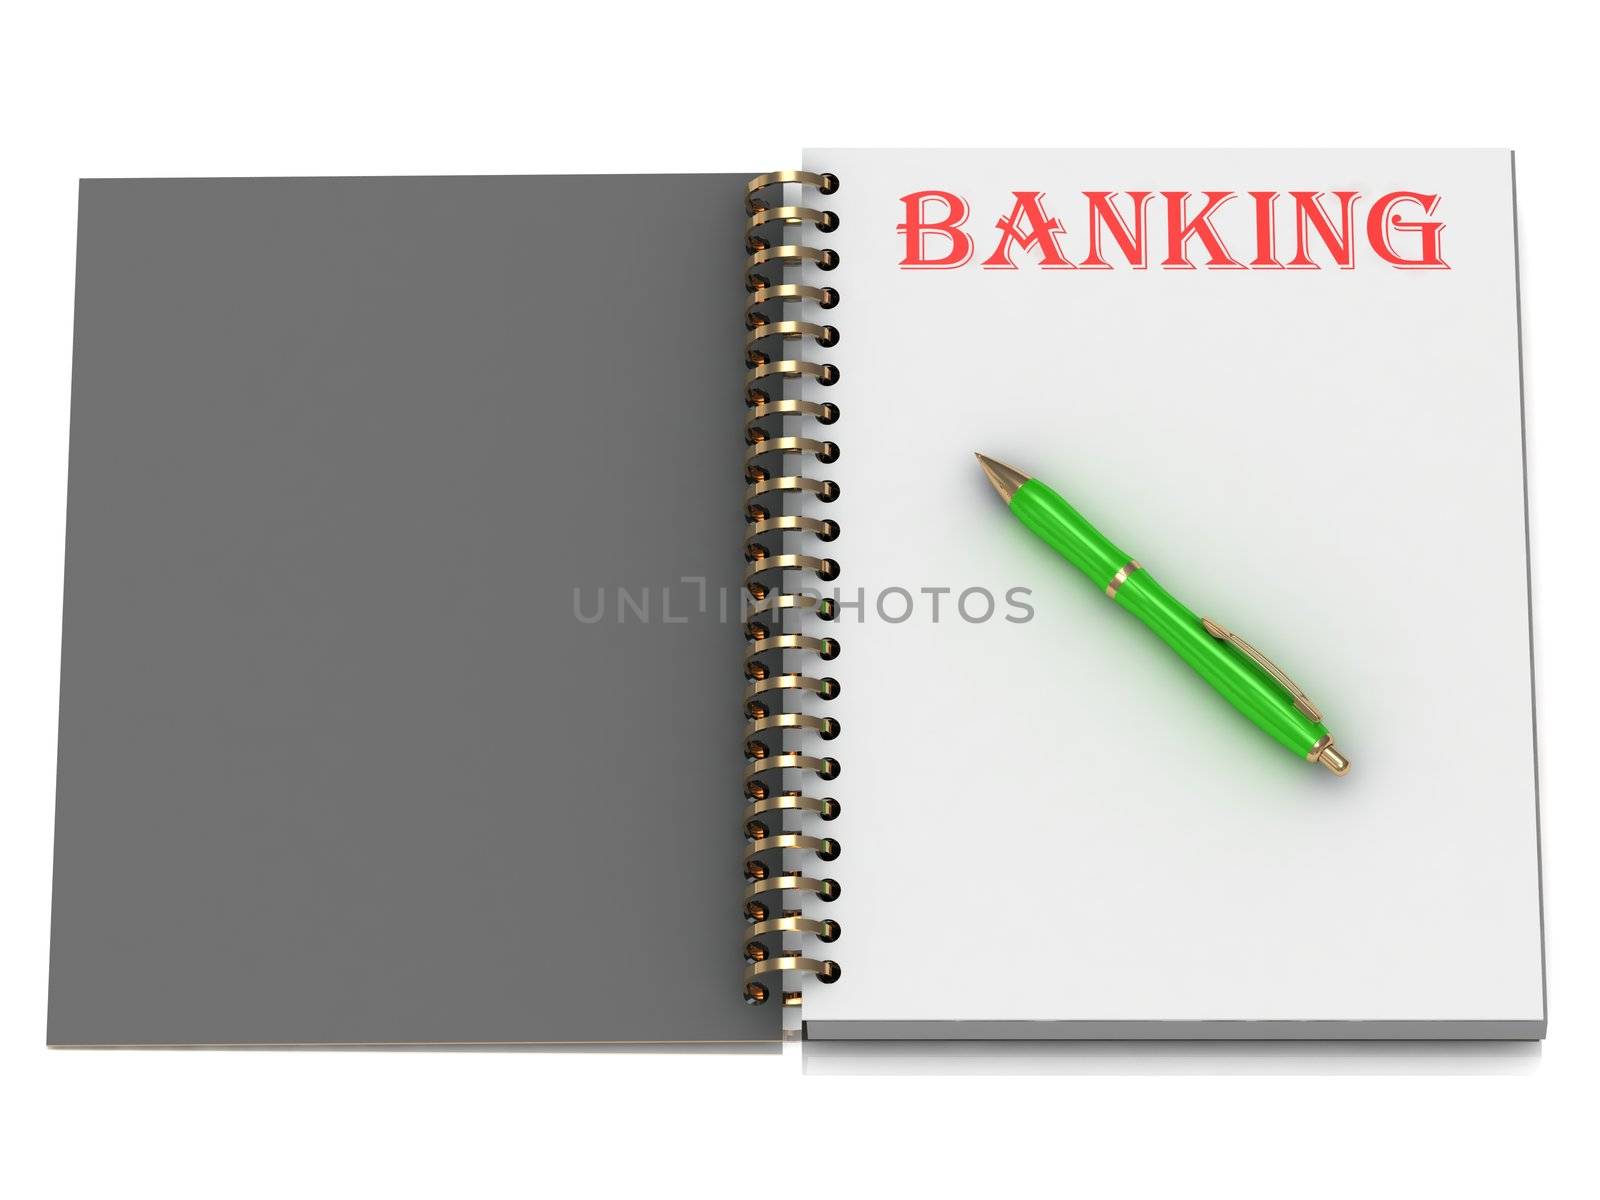 BANKING inscription on notebook page and the green handle. 3D illustration isolated on white background